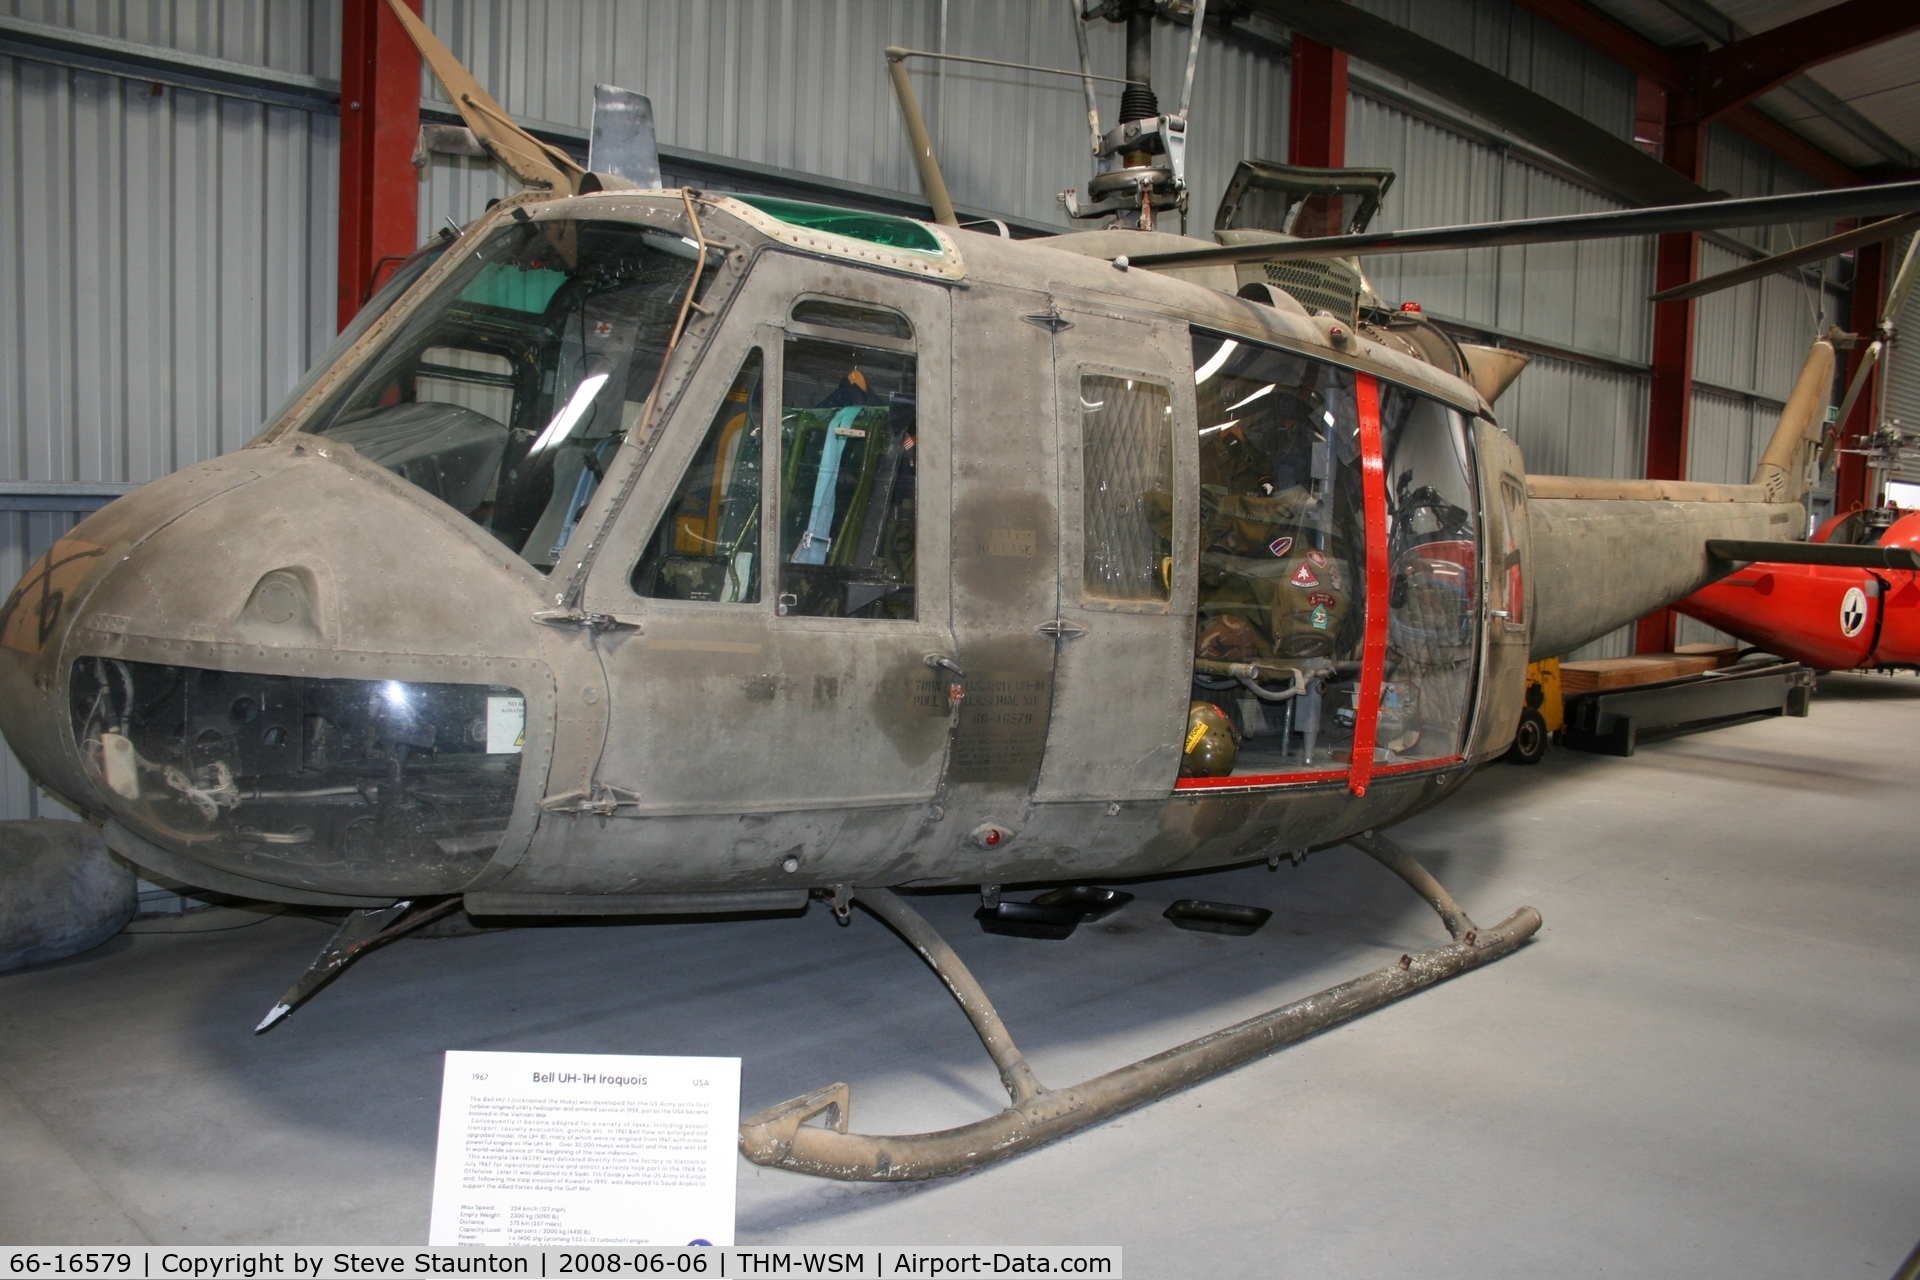 66-16579, 1967 Bell UH-1H Iroquois C/N 8773, Taken at the Helicopter Museum (http://www.helicoptermuseum.co.uk/)